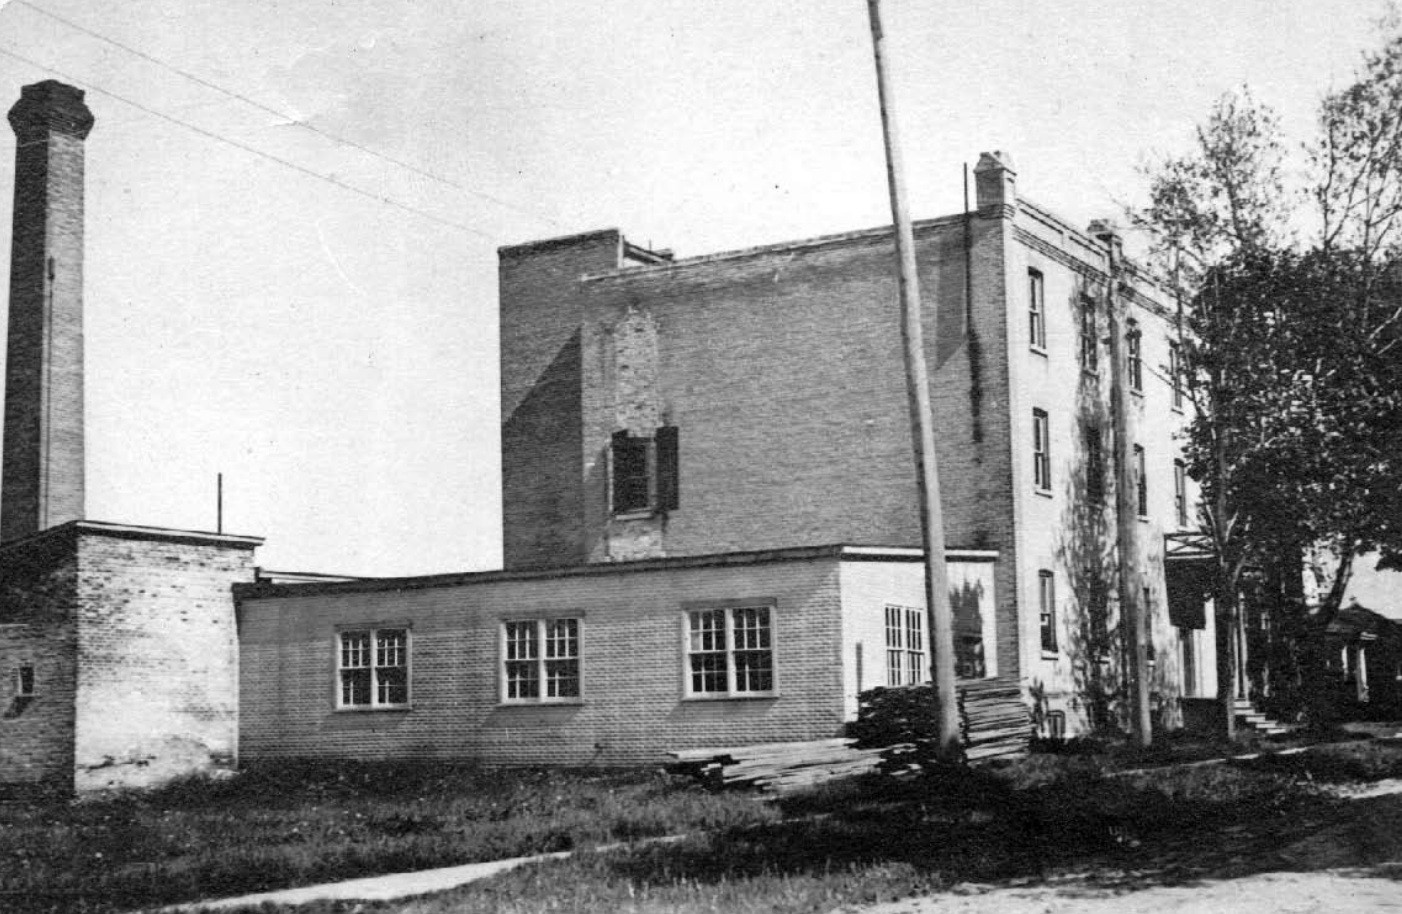 The Uxbridge Cabinet and Organ Co. built this new building to the south of the original one in 1889 and moved the factory to its new location in the spring of 1890. Photo courtesy of Tales from the Uxbridge Valley by: Allan McGillivray.